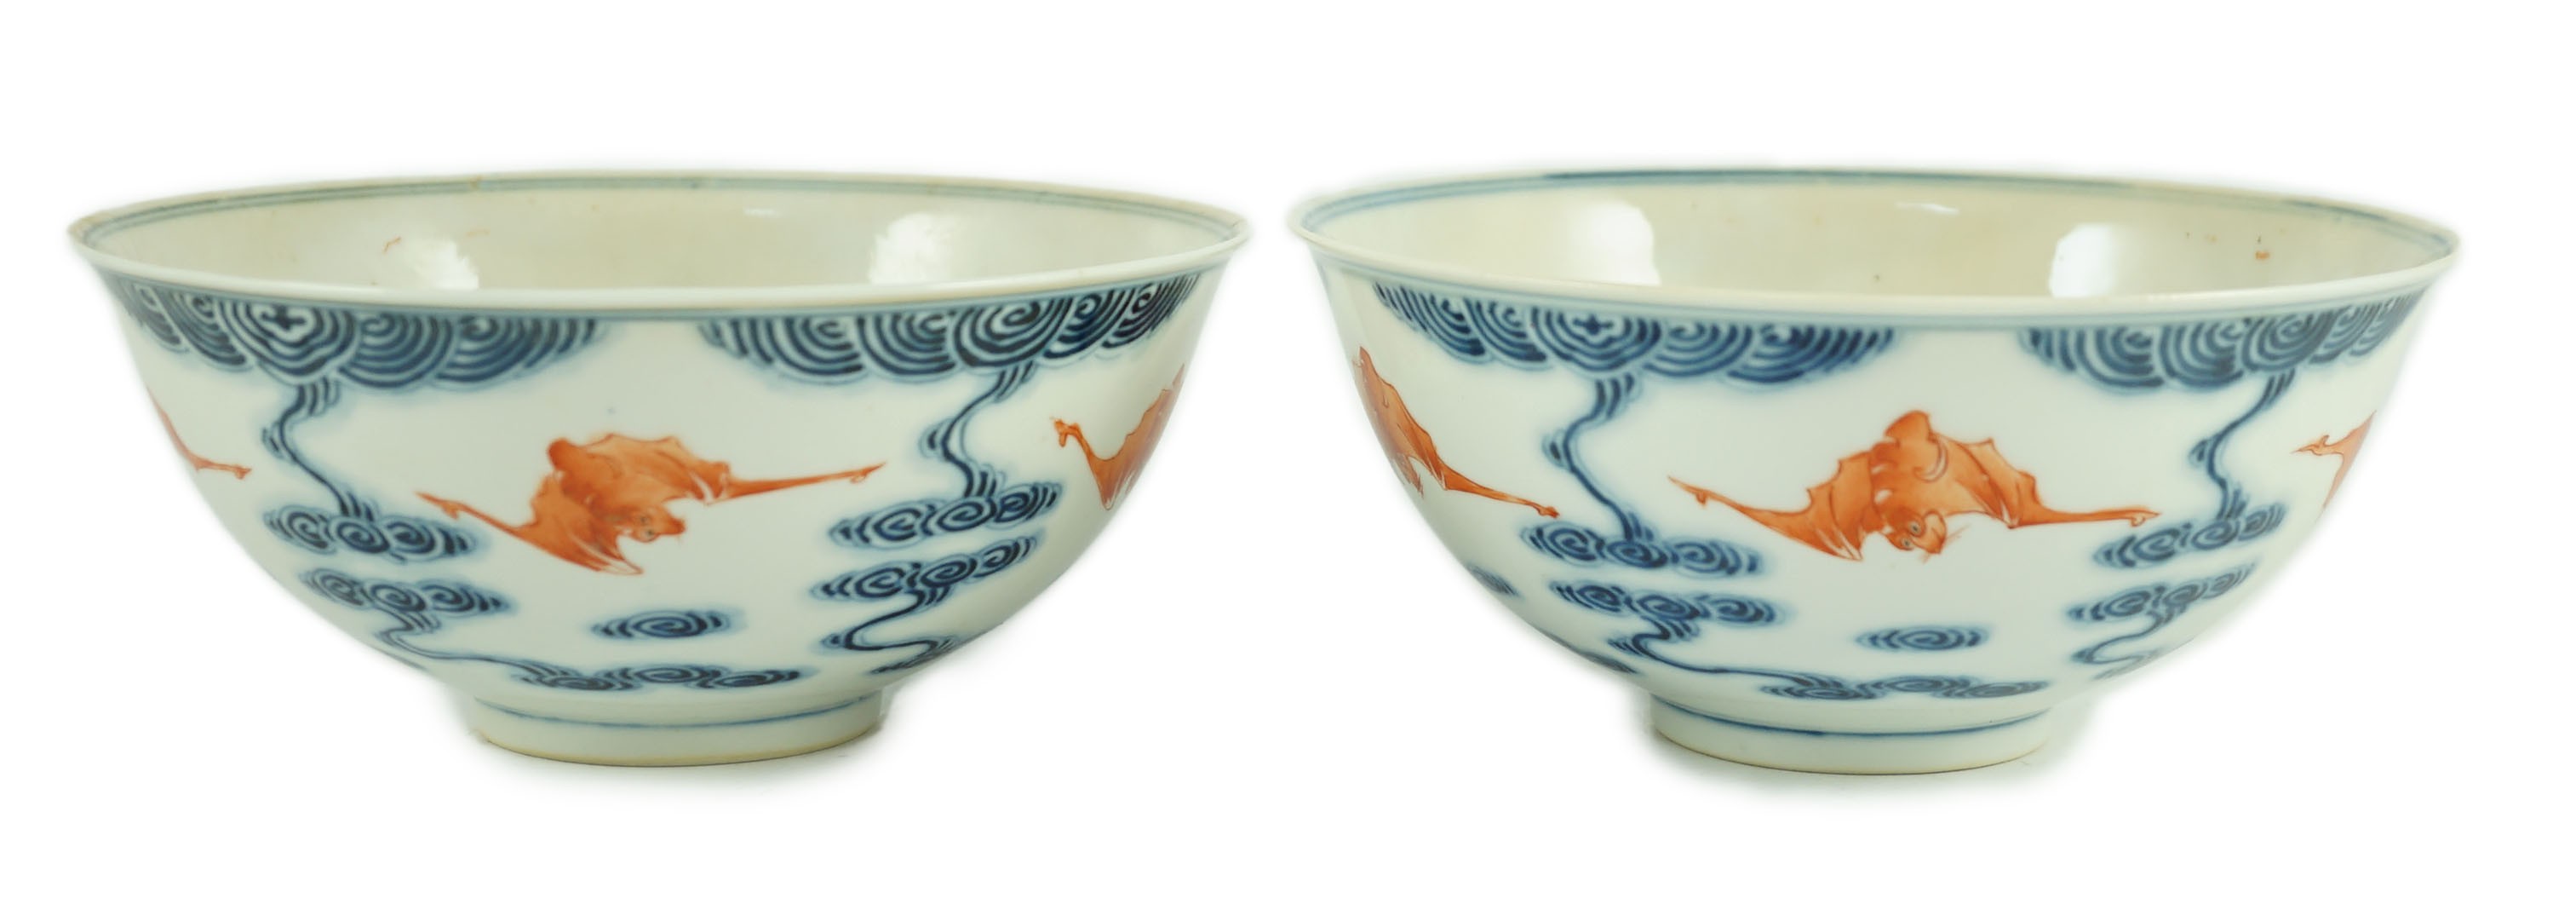 A pair of Chinese iron red and underglaze blue ‘five bat’ bowls, Guangxu mark and probably of the period (1875-1908), 16.5cm diameter